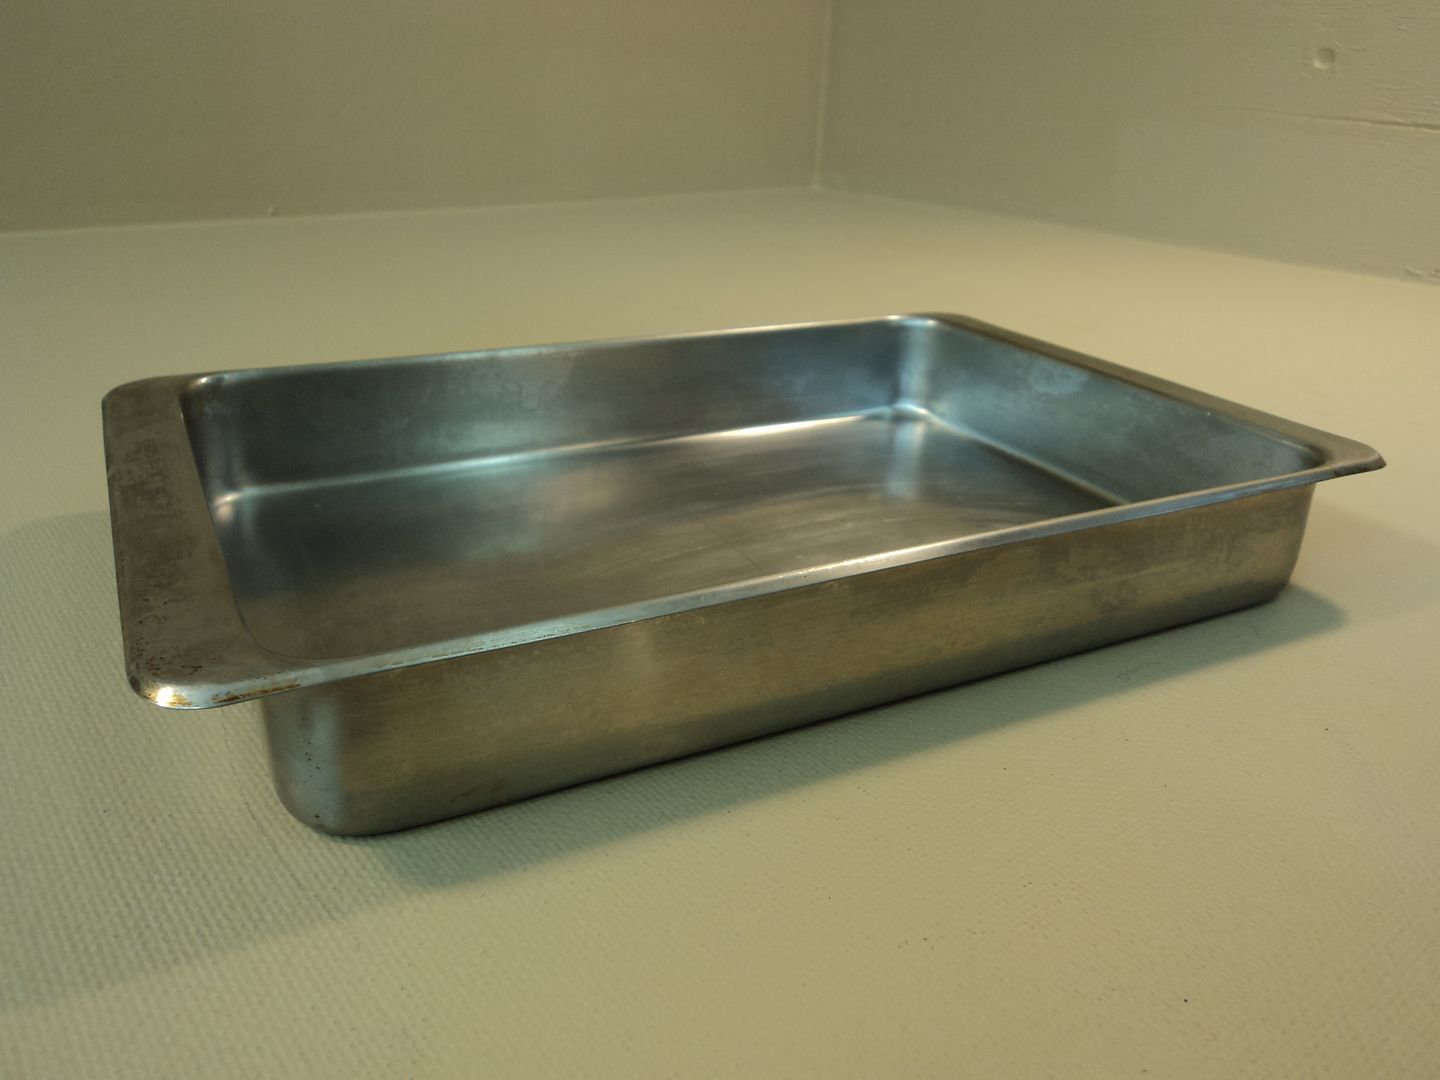 Revere Ware Cake Baking Pan 13in L x 9in w x 2in H 4 Qt 2522 Stainless Steel